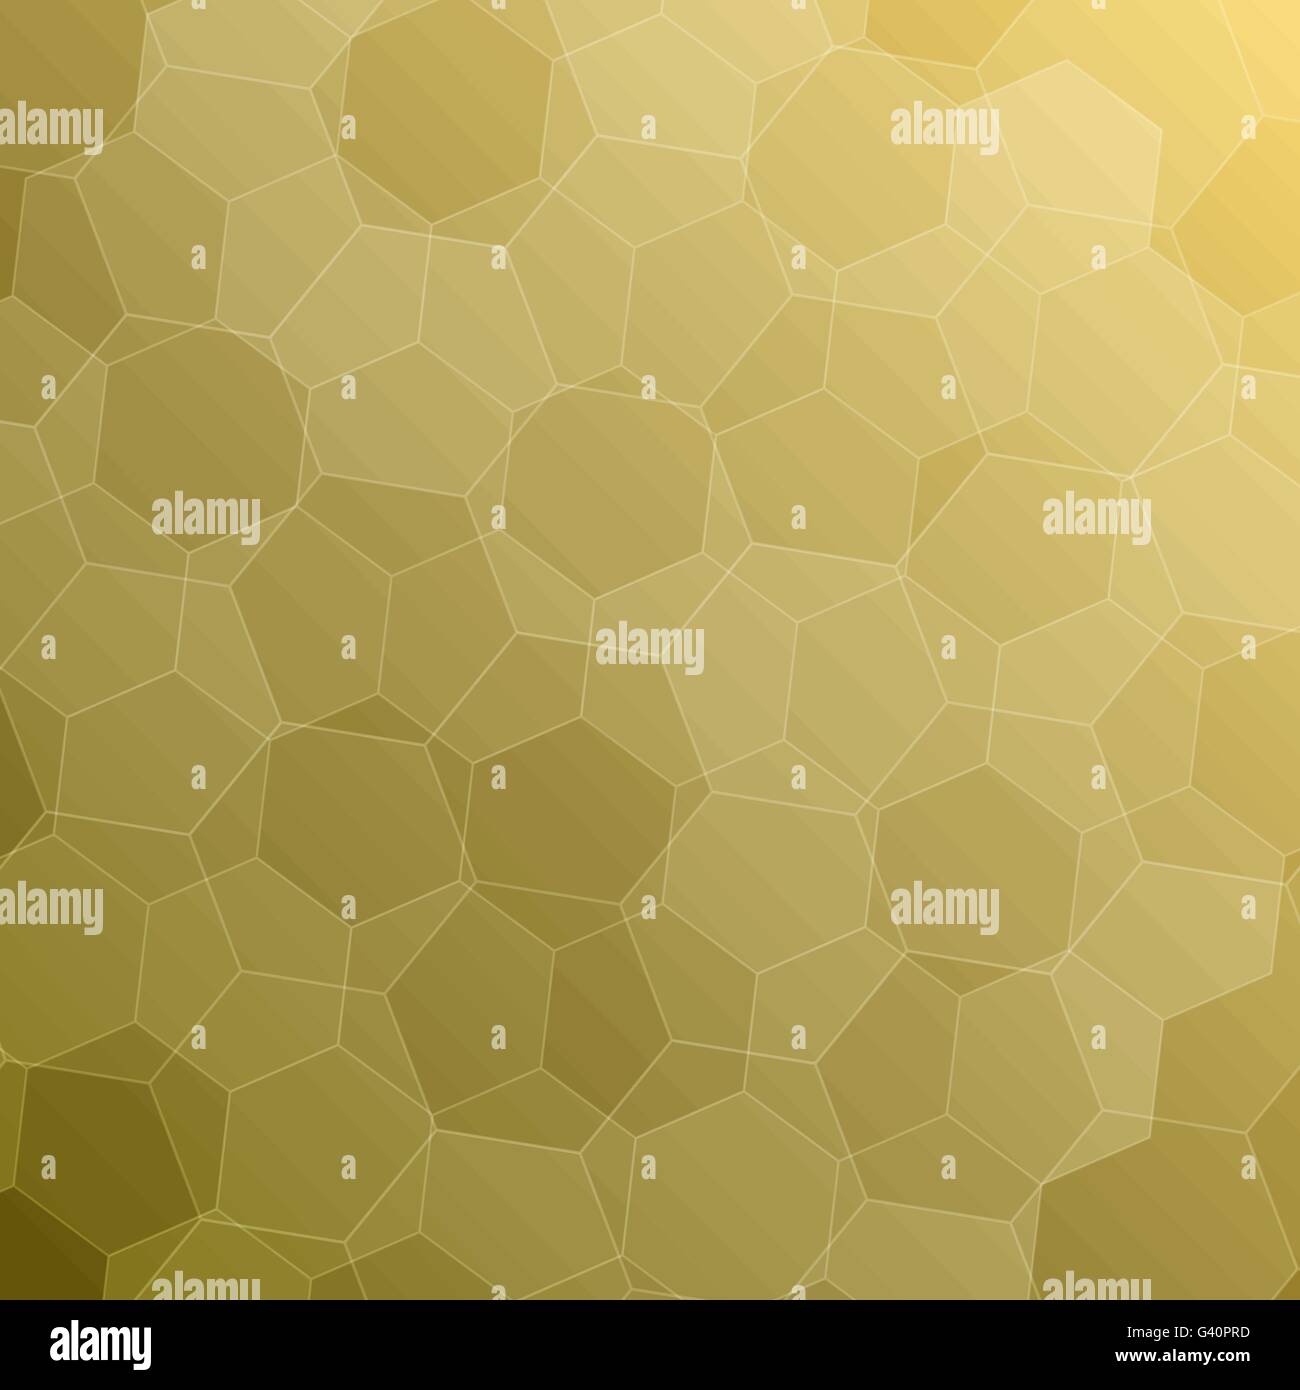 Abstract yellow background with hexagons, stock vector Stock Vector